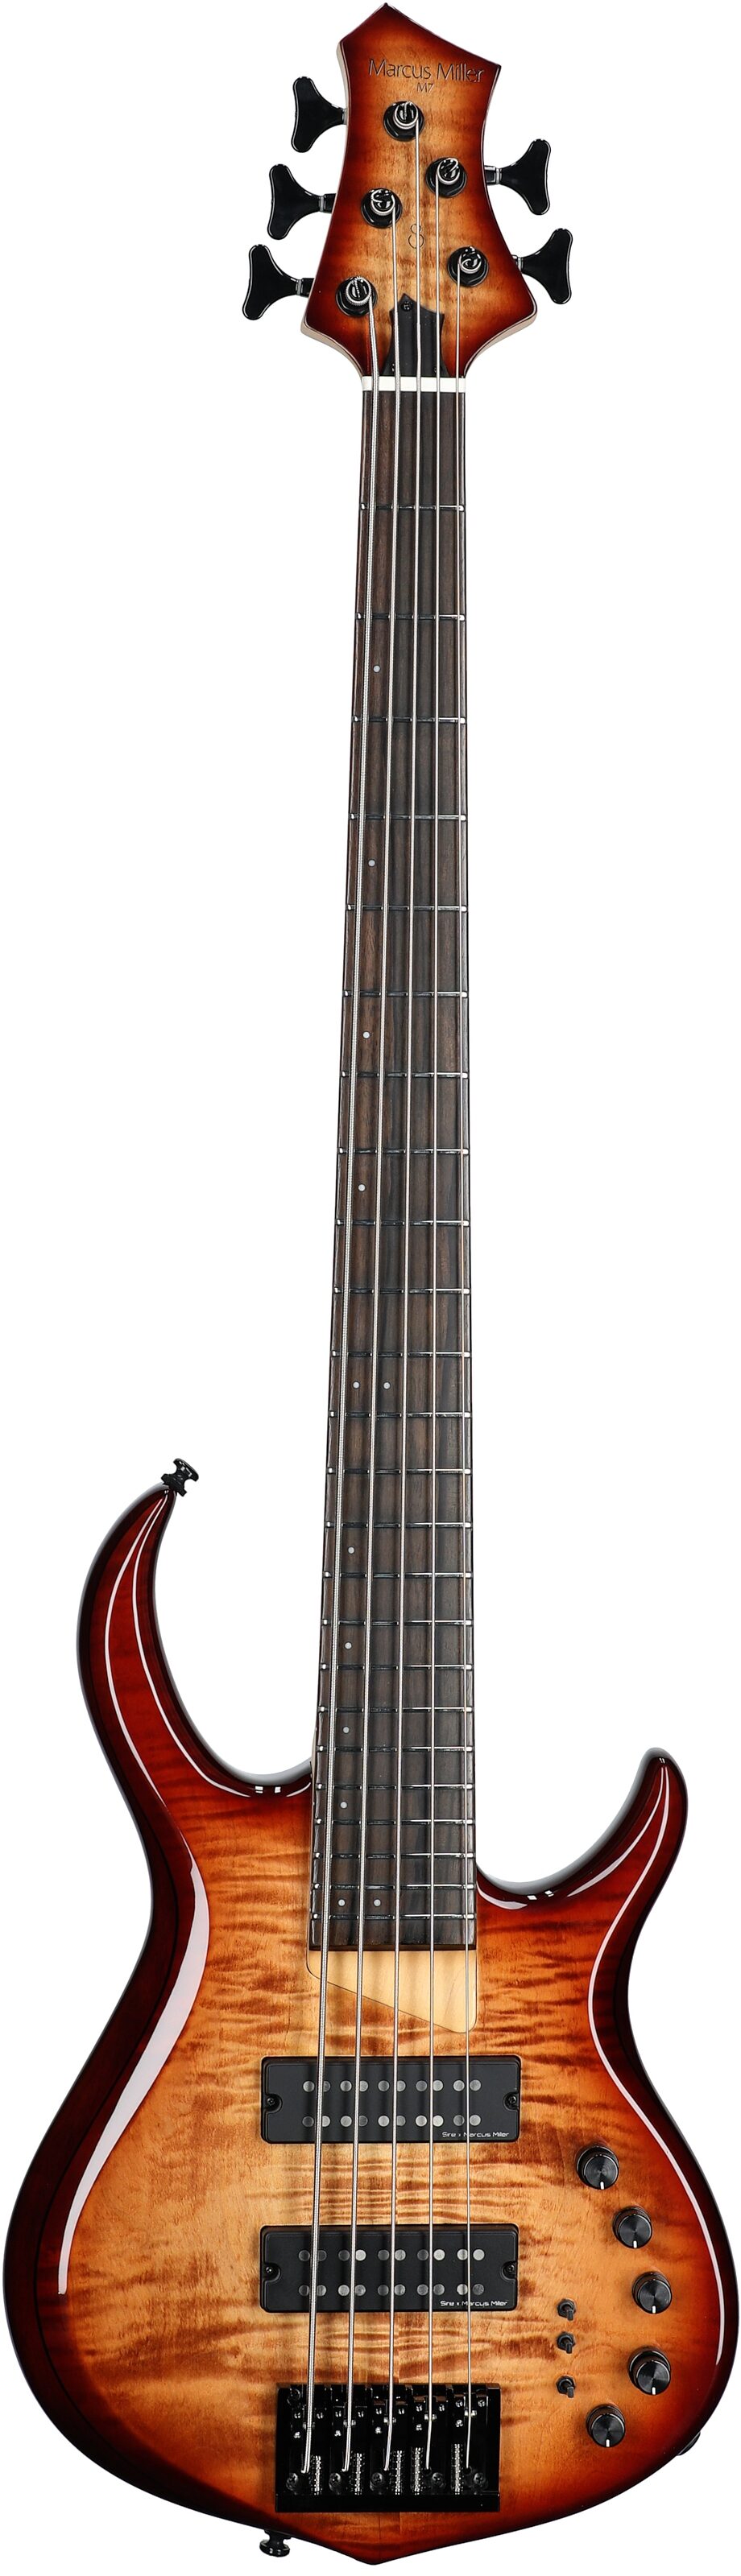 Sire Marcus Miller M7 Electric Bass Guitar, 5-String